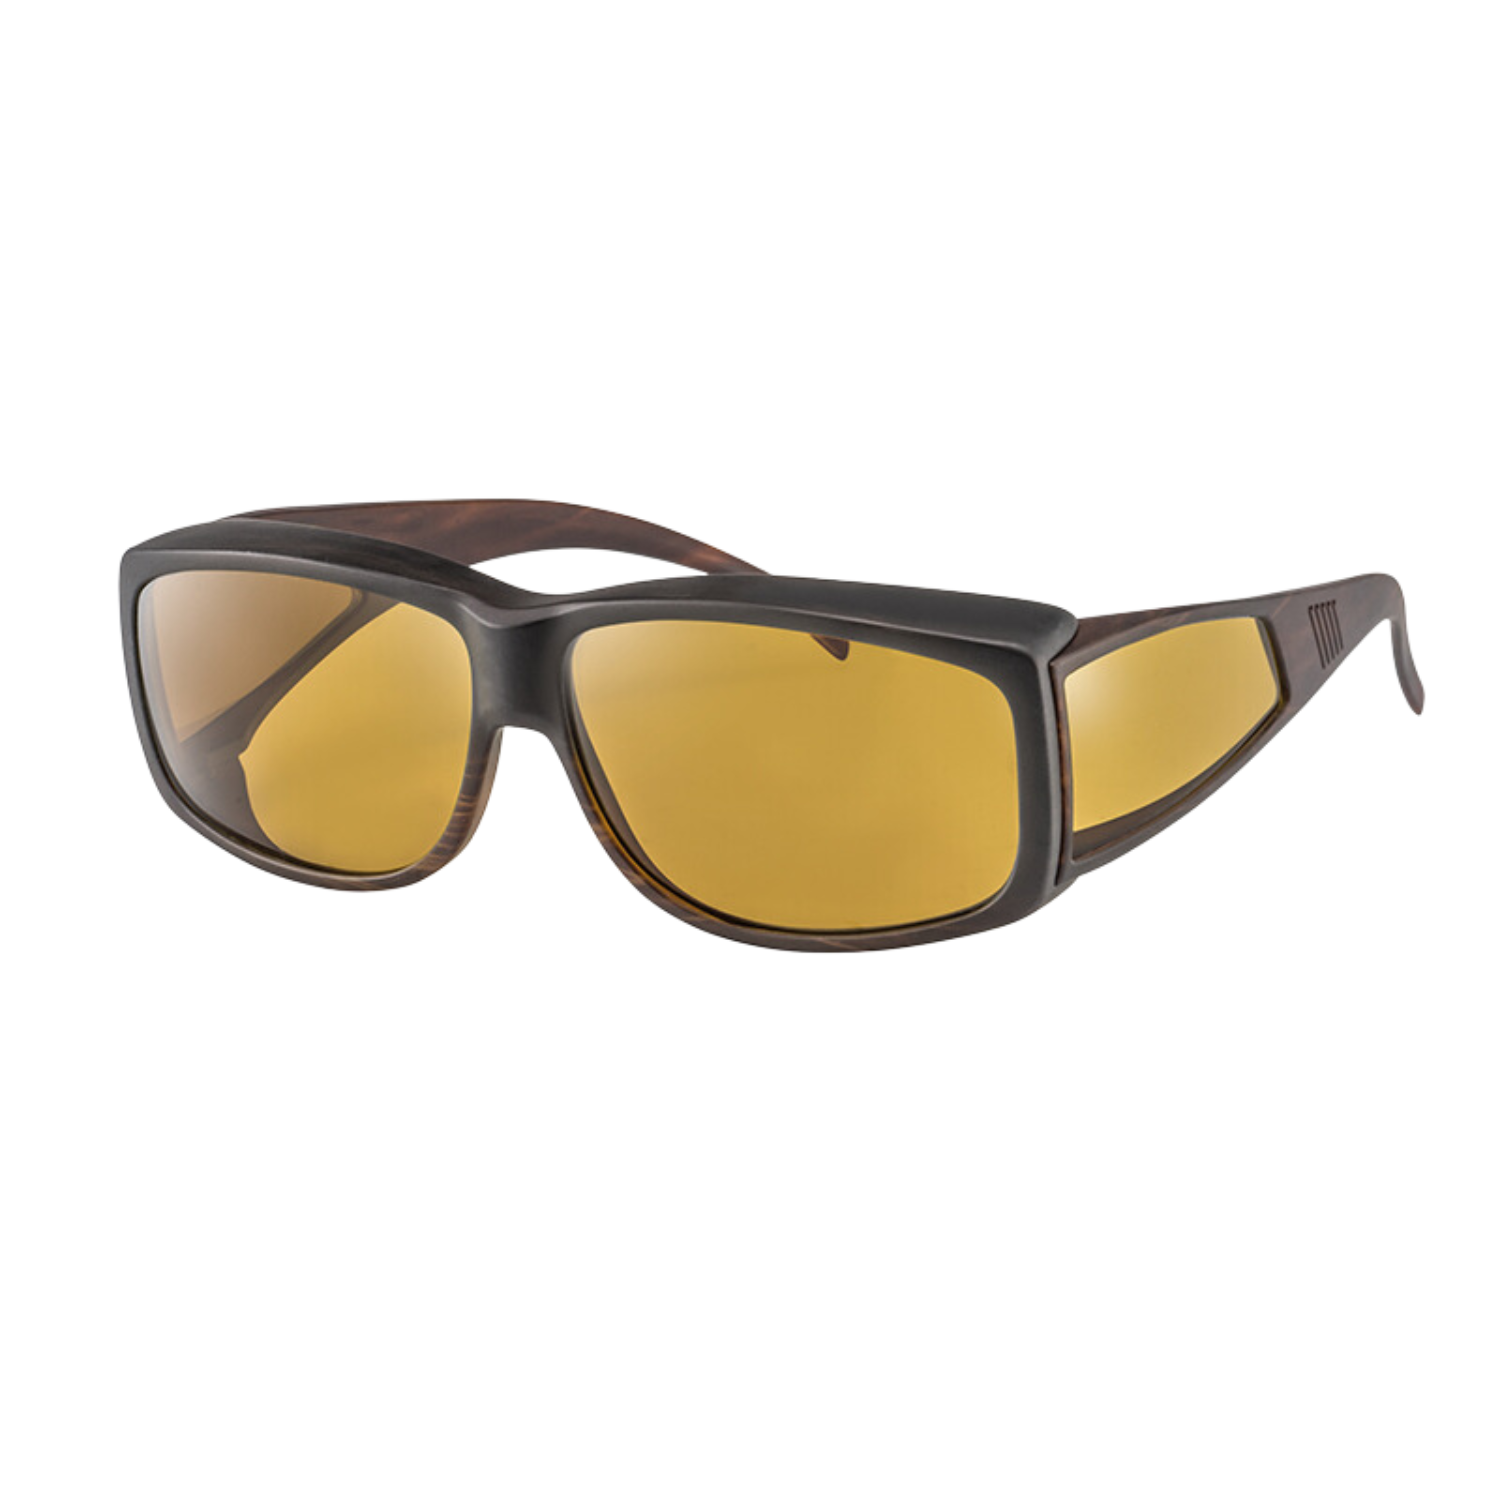 Image of the Polarized Asensys XL Blue Light Blocking Glasses with Yellow Tint from Eschenbach.